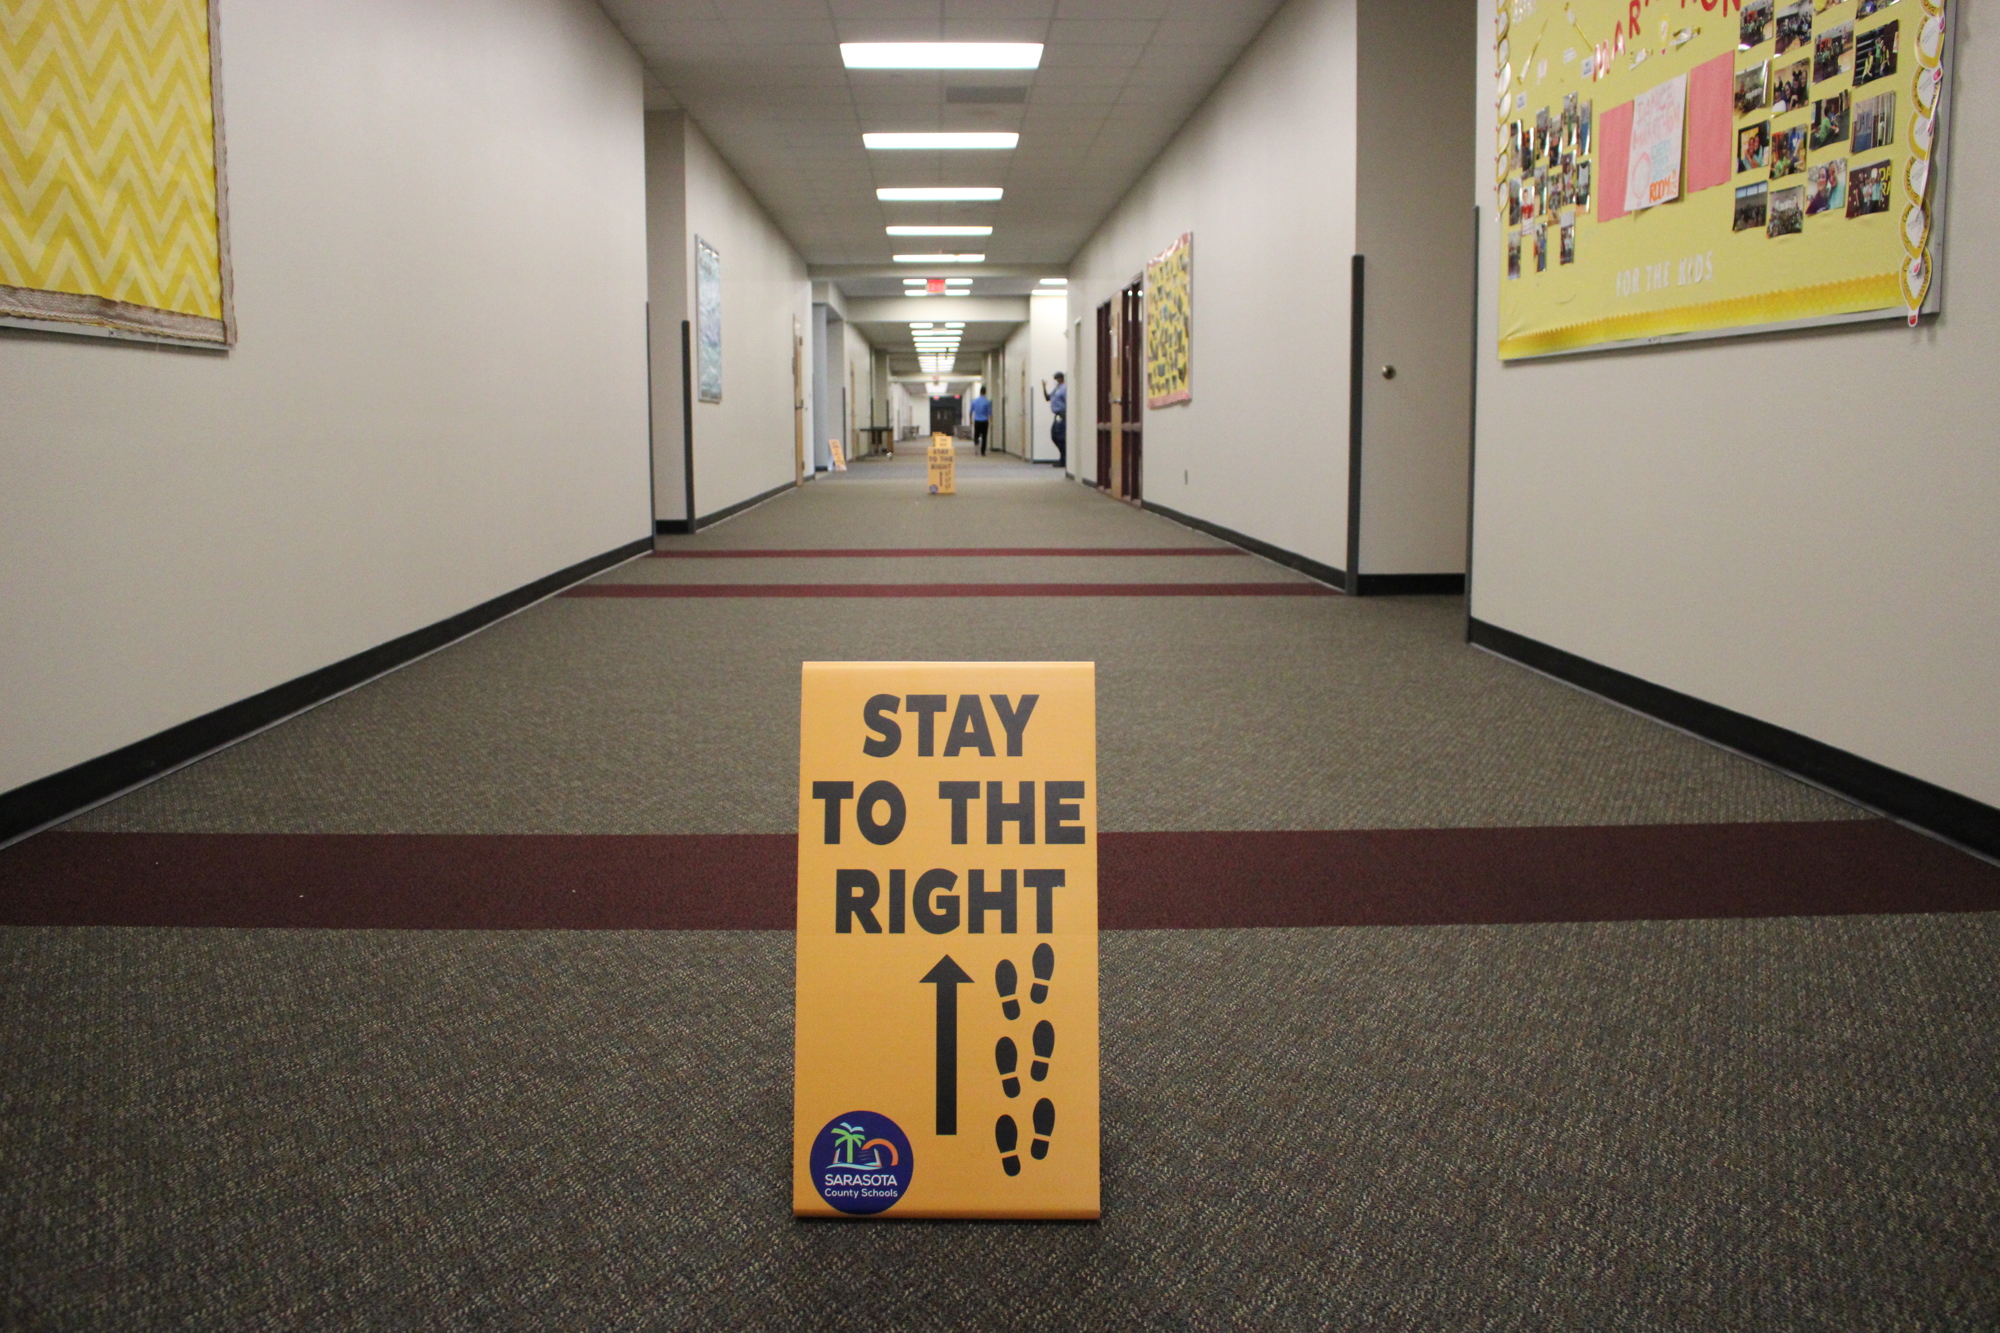 Signs are posted throughout the hallways to help control the flow of traffic. Photo courtesy of Sarasota County Schools